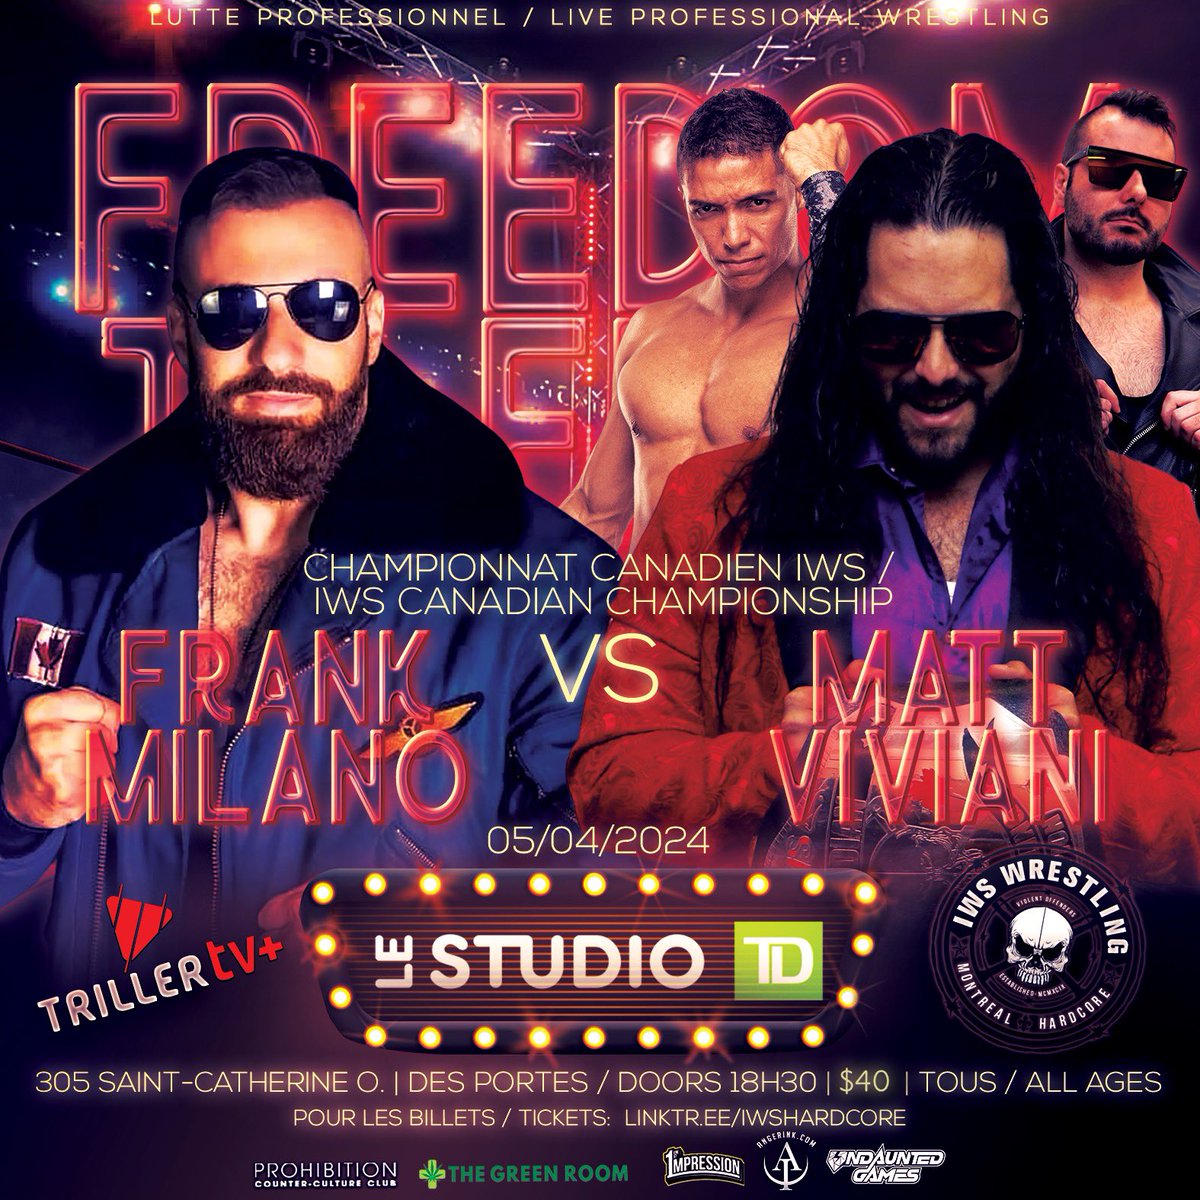 IWS FREEDOM TO FIGHT 4/5/24 - 30$ - Tous ages/All ages 🎟️: linktr.ee/iwshardcore Championnat canadien de l’IWS - IWS Canadian Championship: Matt Viviani (c) vs Frank Milano Billets disponible maintenant! Tickets on sale now! Or watch live/Ecoute en direct: Triller+!